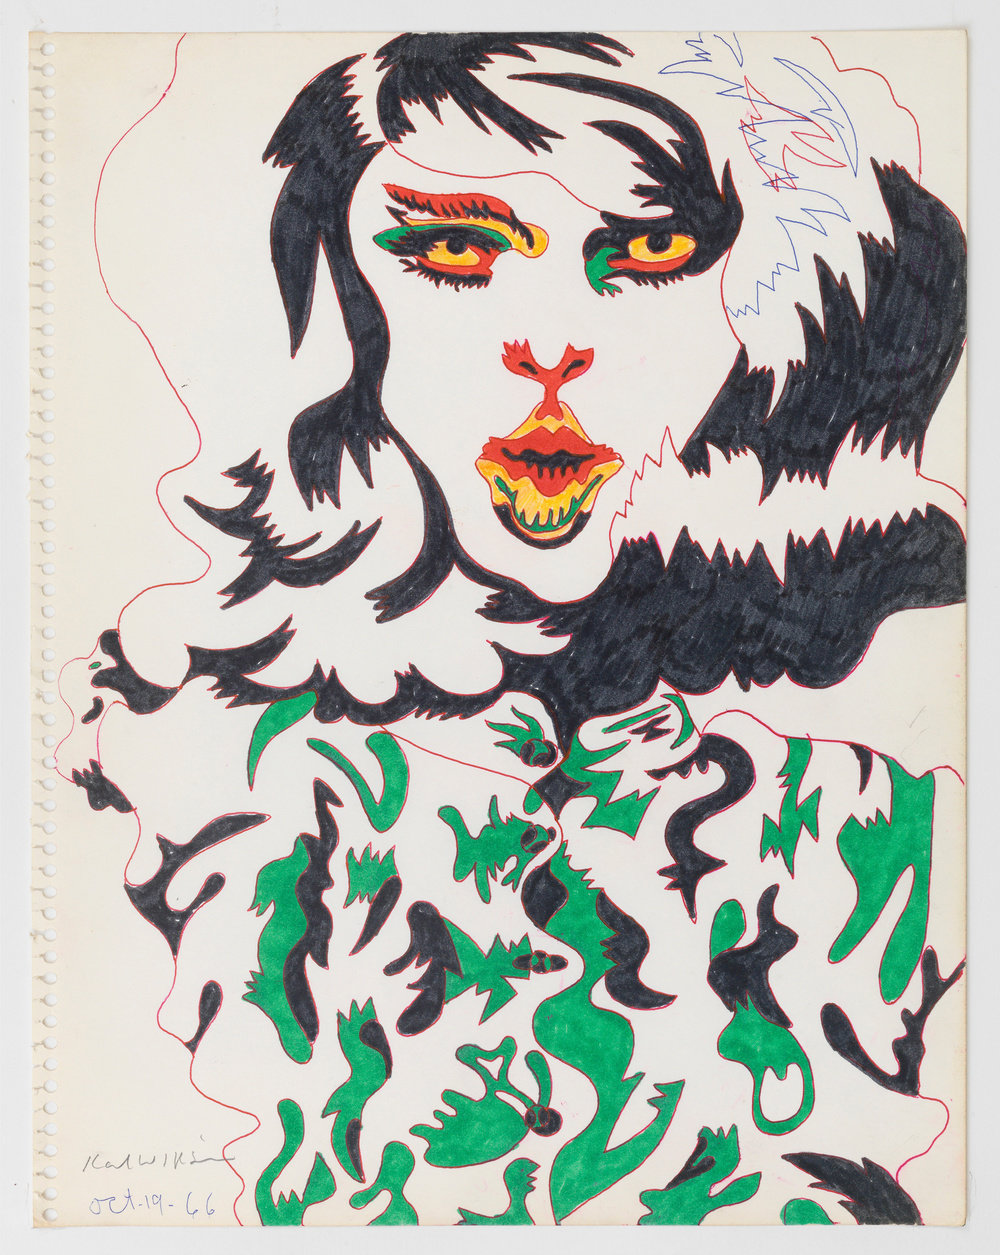 A color ink on paper portrait of a long-haired figure by Karl Wirsum wearing a green and black patterned garment with multicolored eyes and mouth. 